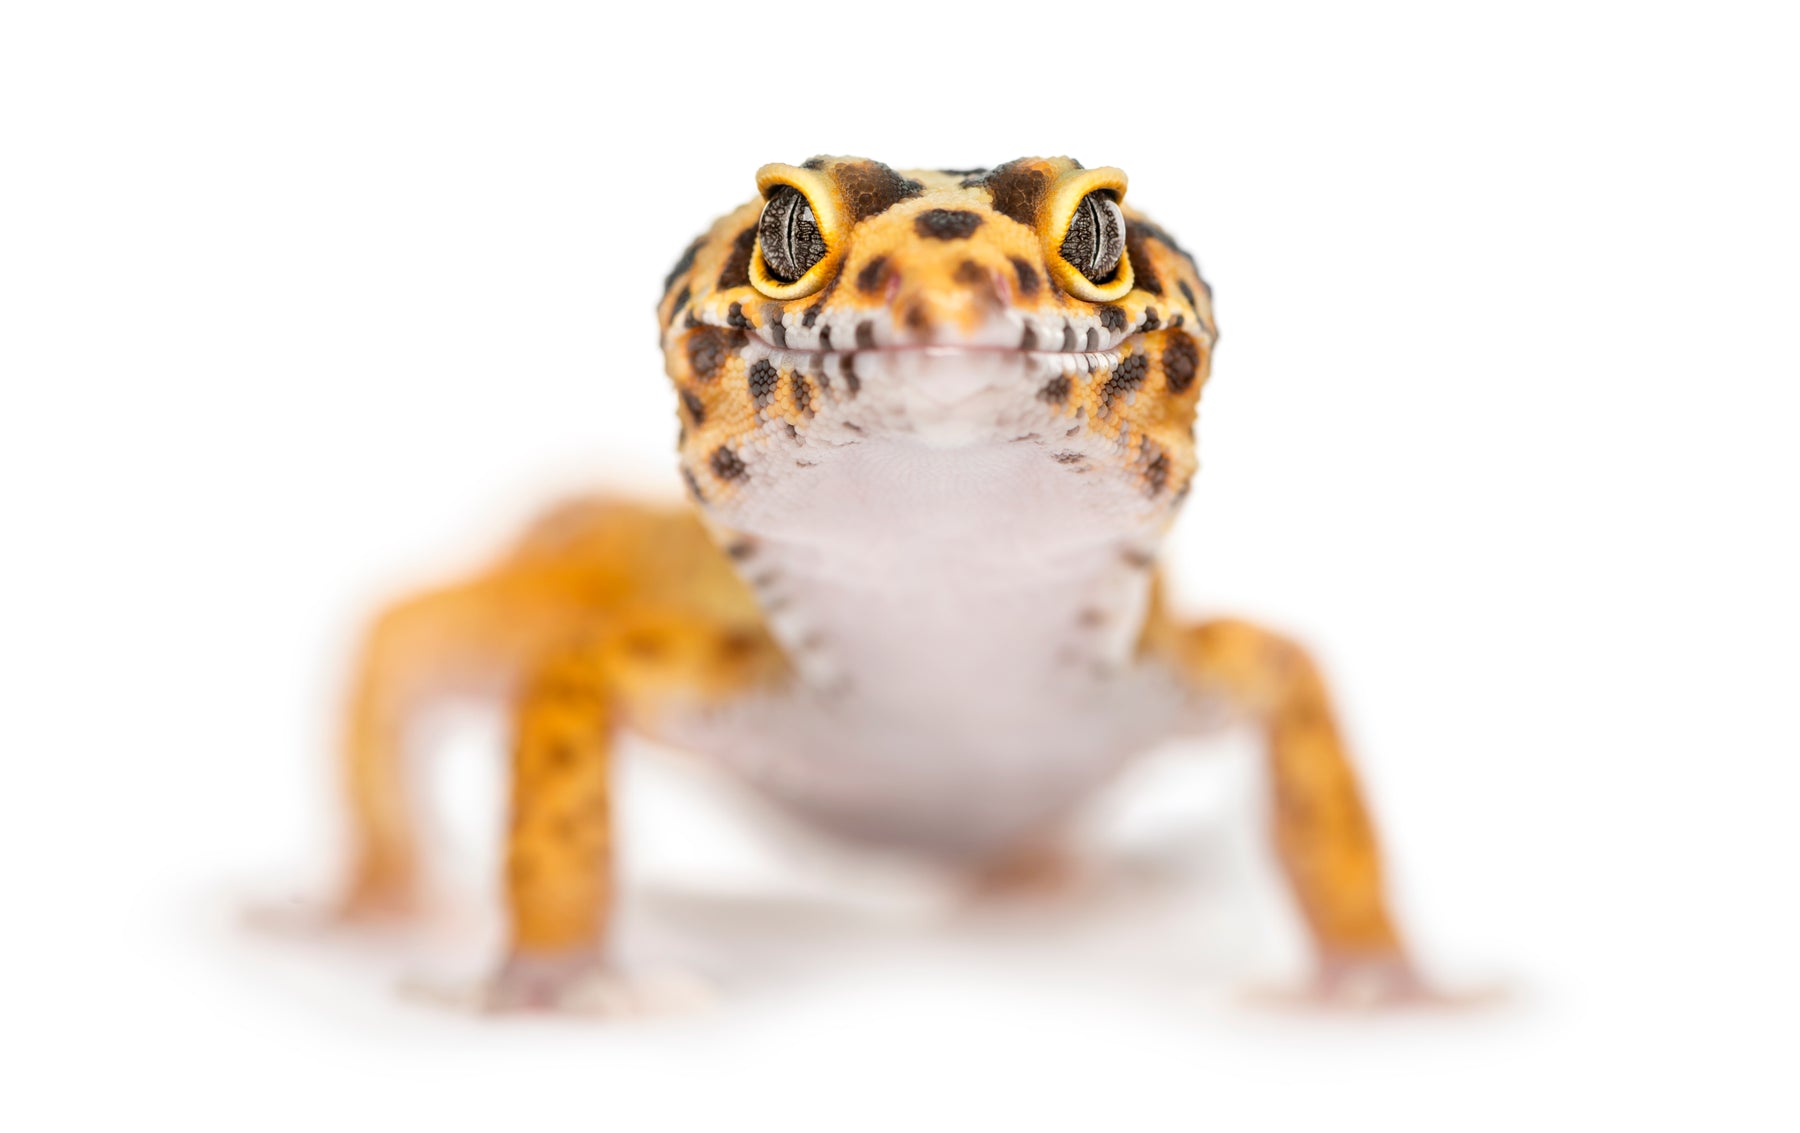 How to Care for Your Leopard Gecko